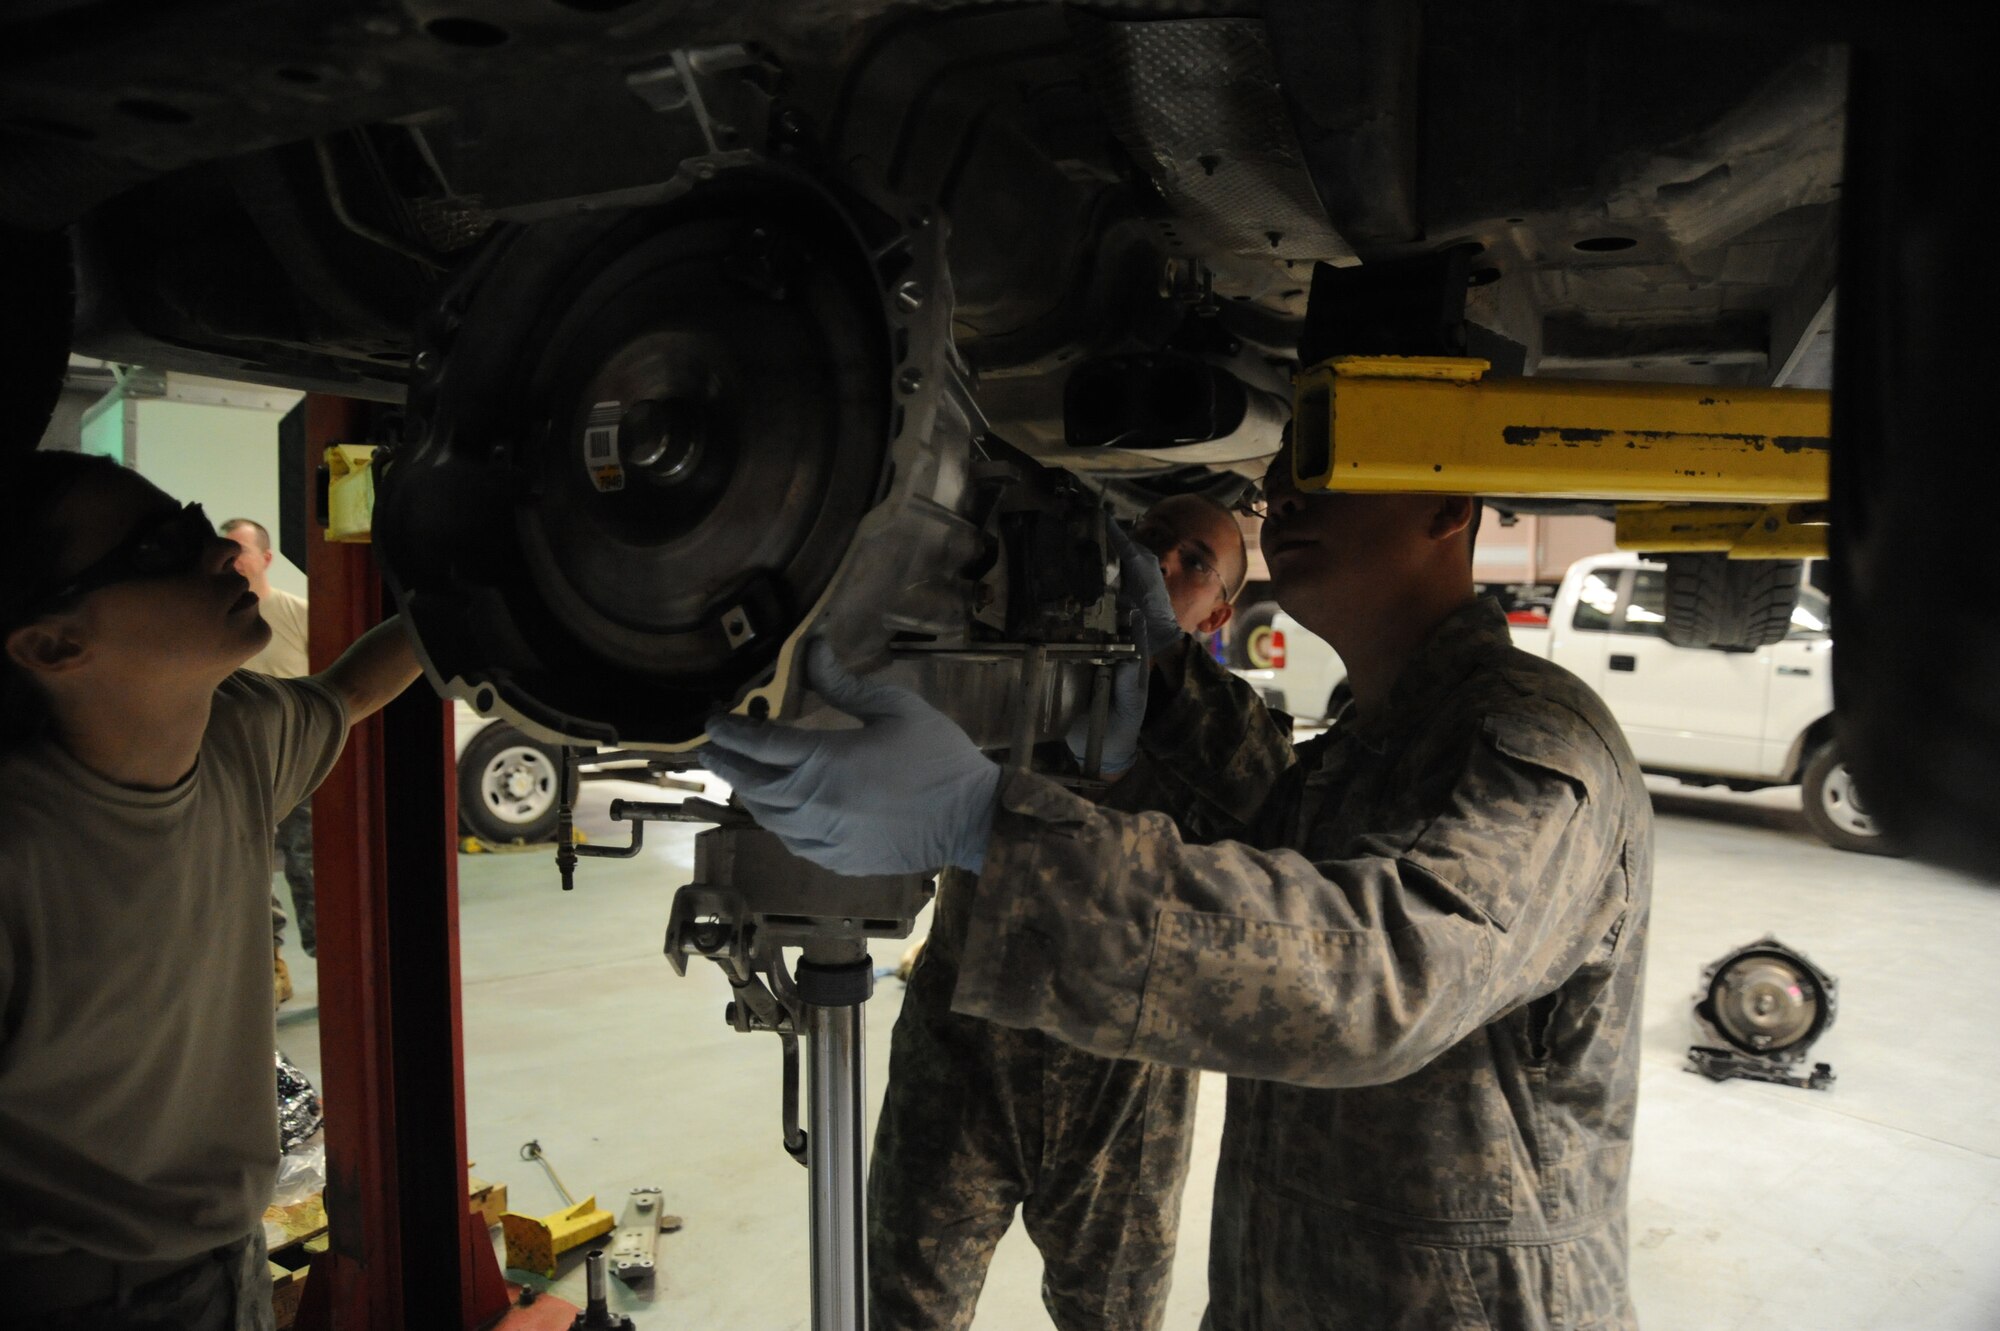 Lt. Col. Tanya Kubinec, 380th Expeditionary Logistics Readiness Squadron, commander, Senior Airman Adam Owens and Senior Airman Michael Jakubec, 380th ELRS, vehicle maintenance, line up a new transmission with the engine of a Pontiac GTO, April 26 at an undisclosed location in Southwest Asia. Colonel Kubinec coined the two Airmen for their work on the GTO as well as other critical vehicles belonging to the 380th Air Expeditionary Wing. Airman Owens is deployed from 174th Air National Guard Base, Hancock Field, N.Y. and hails from Binghamton, N.Y. Airman Jakubec is deployed from Kadena AB, Japan and hails from Spanaway Wash.  (U.S. Air Force photo by Senior Airman Brian J. Ellis) (Released)